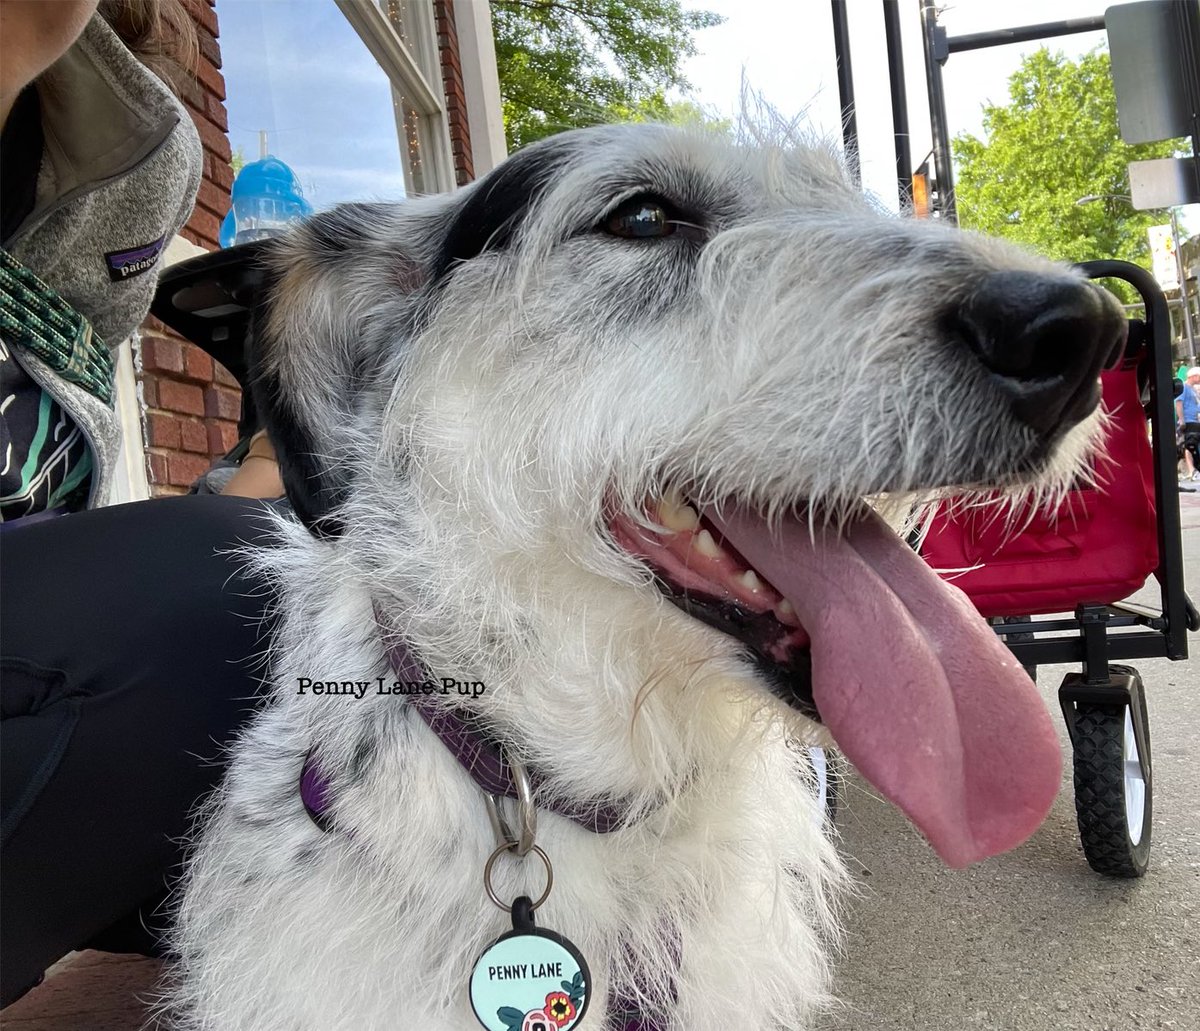 On dis #ThrowbackThursday I’m reminiscing about last year’s Mutt Strut! 

I hope we reach our goal dis year so I can walk with all da doggos! See thread fur donation link to da Greenville Humane Society! 👇
#dogs #pennylane #muttstrut